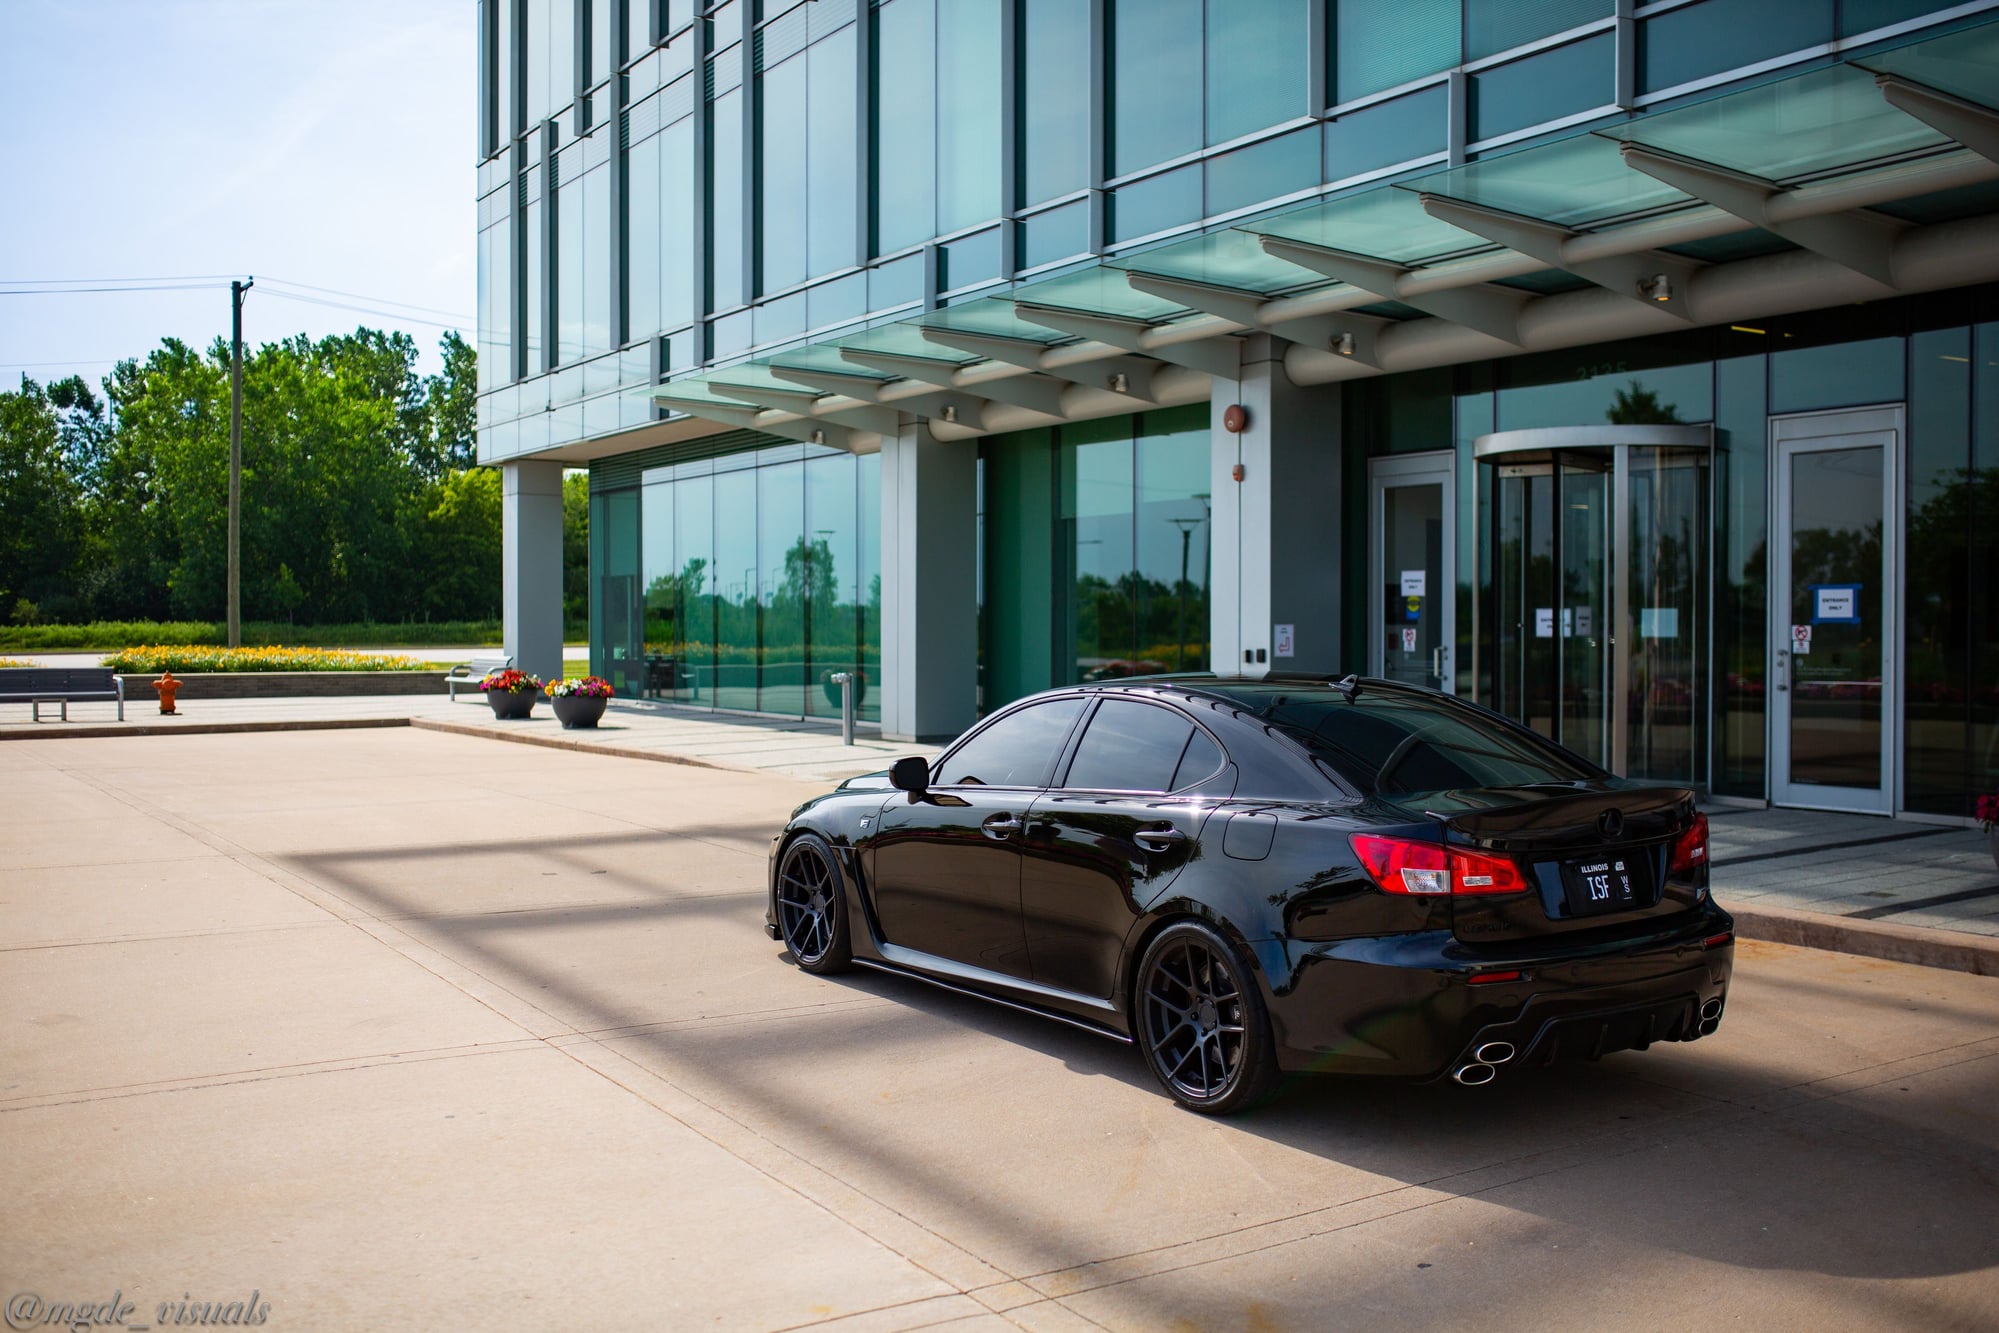 2008 Lexus IS F - 2008 RR-Racing Supercharged ISF - Used - VIN JTHBP262185003155 - 8 cyl - 2WD - Automatic - Sedan - Black - Frankfort, IL 60423, United States